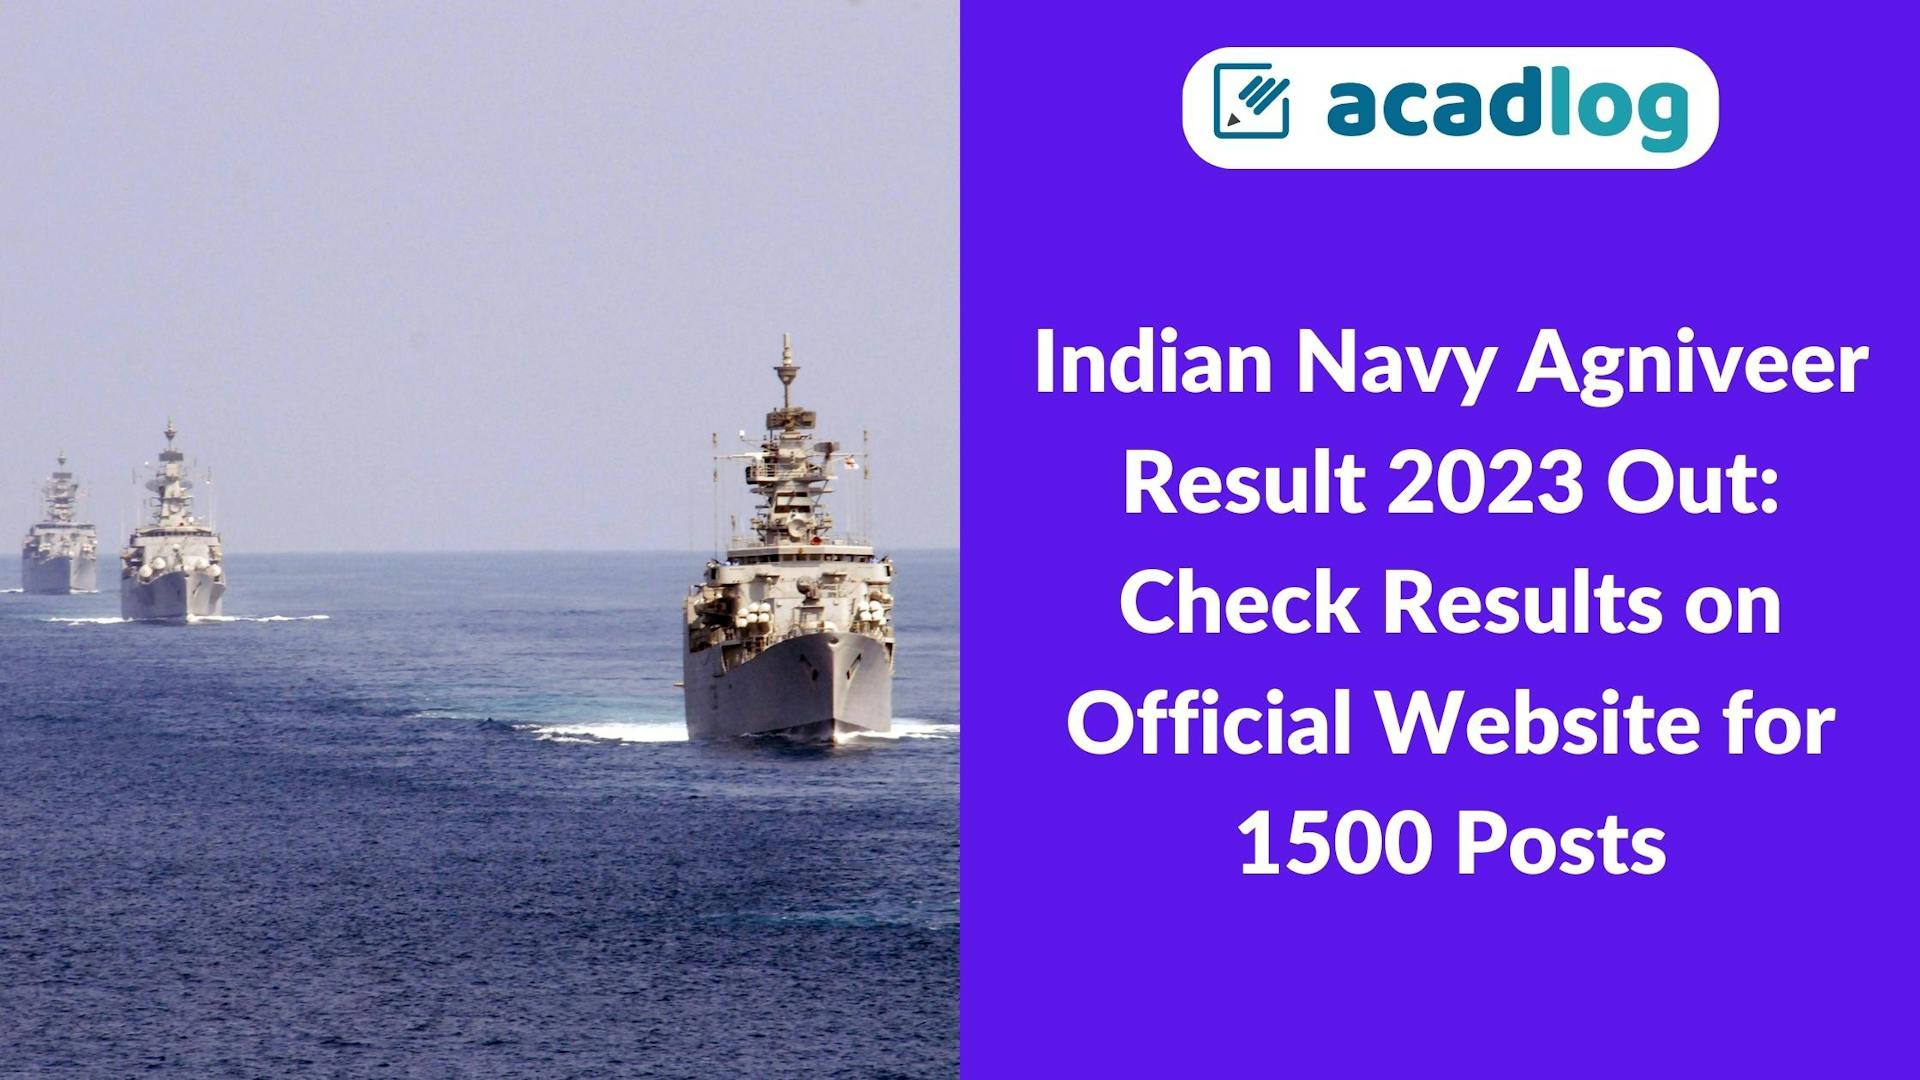 Indian Navy Agniveer Result 2023: Check Results for 1500 Posts